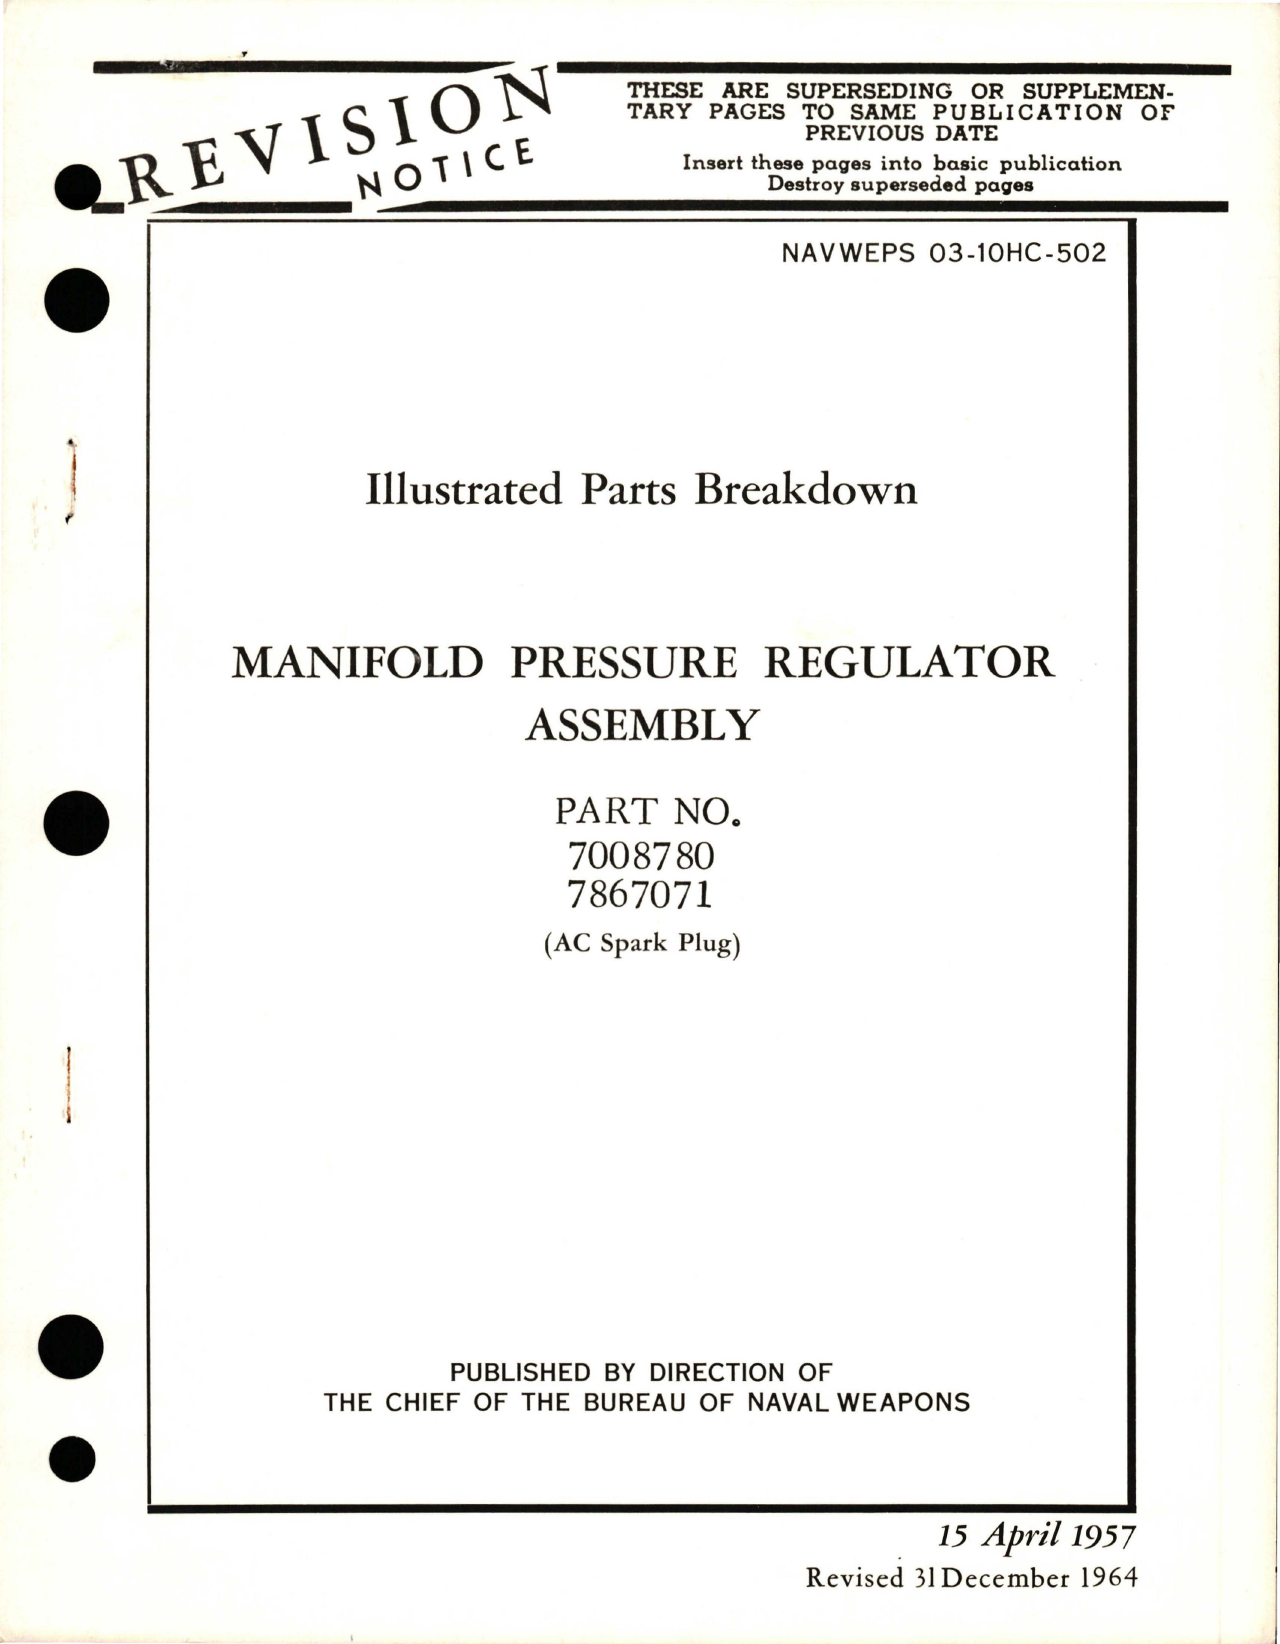 Sample page 1 from AirCorps Library document: Illustrated Parts Breakdown for Manifold Pressure Regulator Assembly - Part 7008780 and 7867071